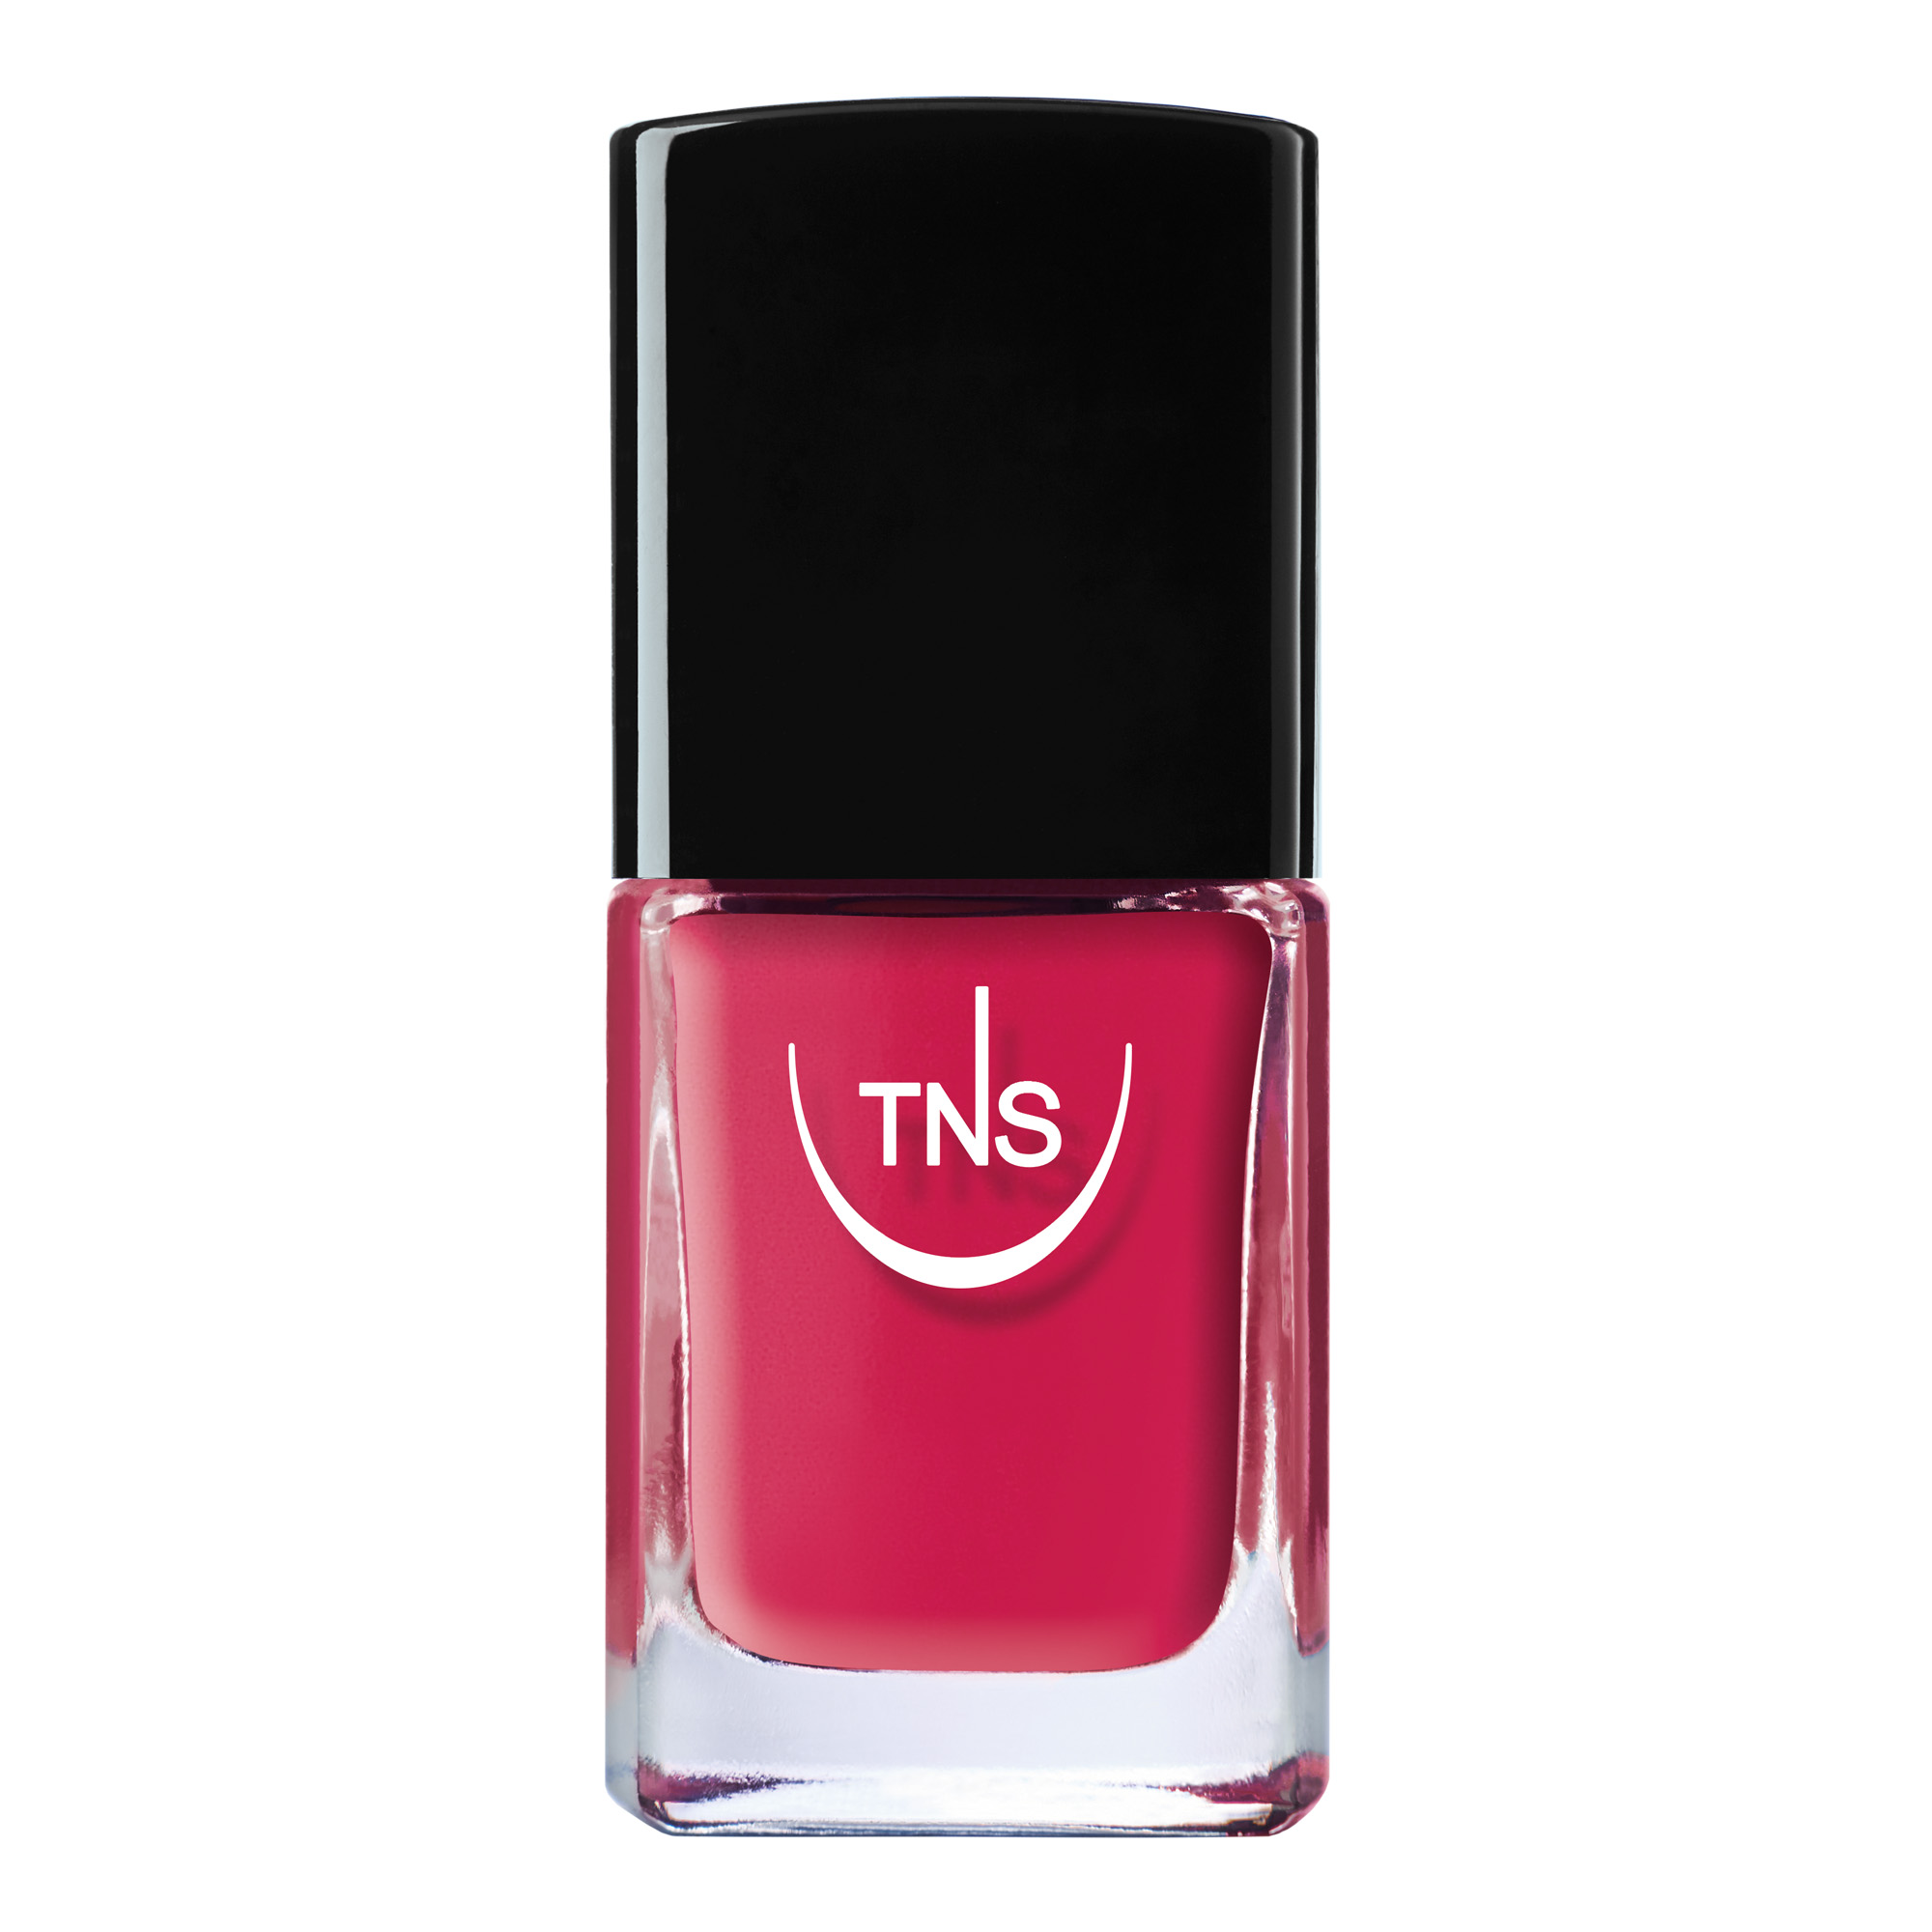 Vernis ongles Coral Bay corail 10 ml TNS